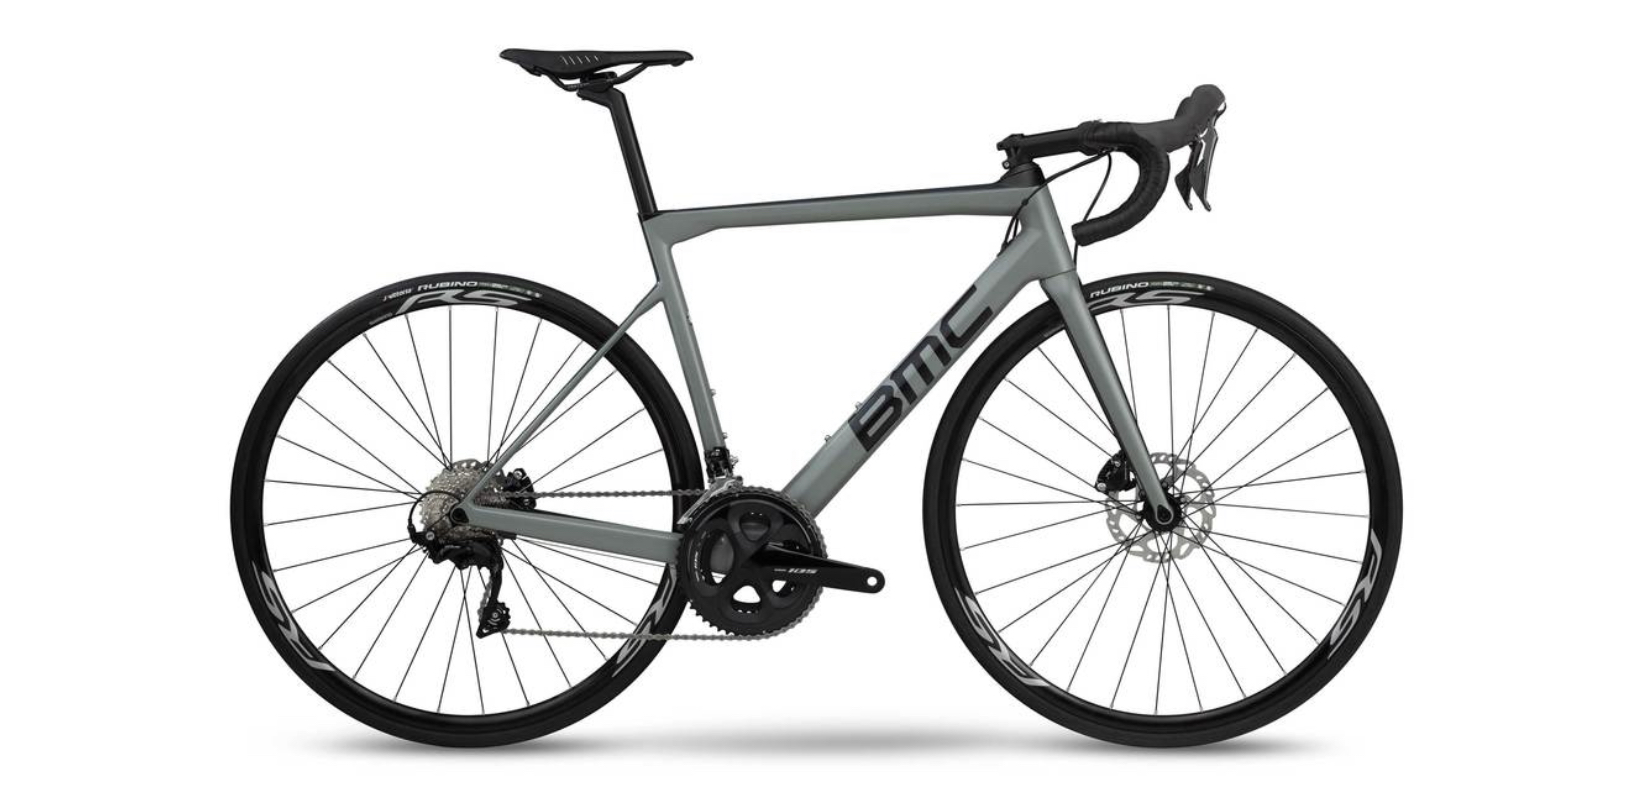 10 of the Road Bikes for Athletes - TRUSTED Reviews